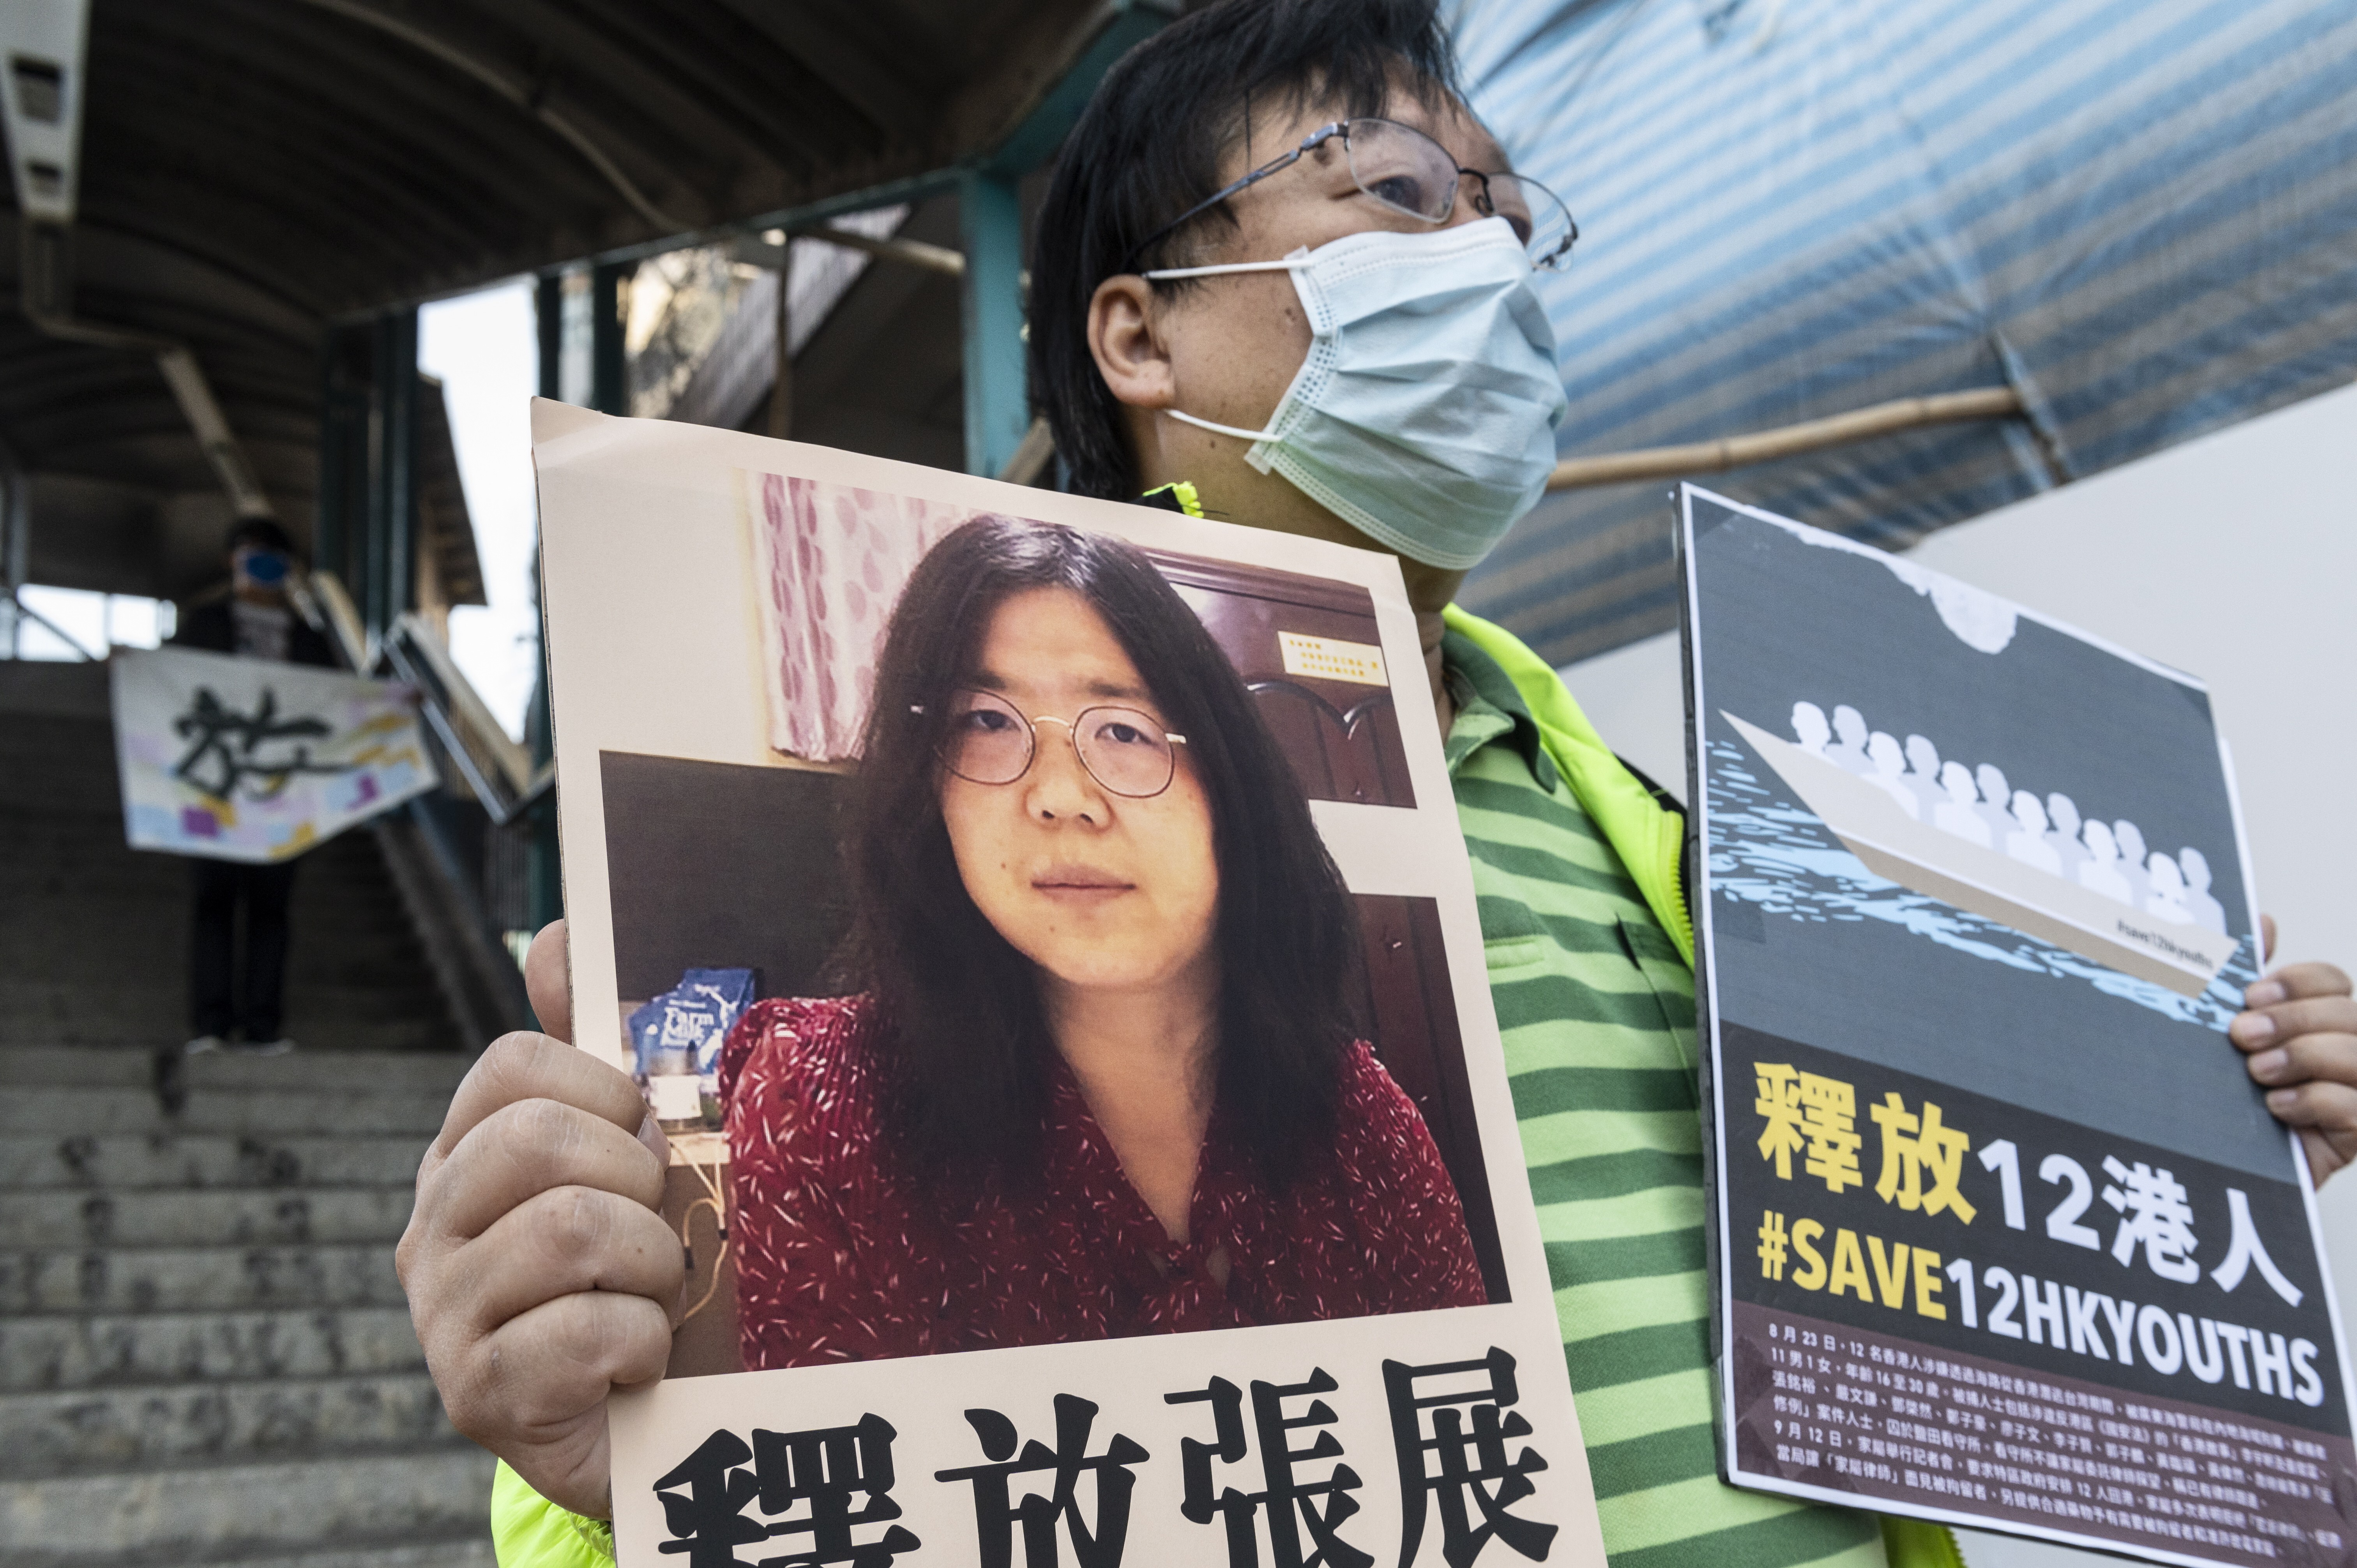 An activist near Beijing’s liaison office in Hong Kong holds up signs to support Zhang Zhan and a group of 12 Hongkongers detained on the mainland for over 130 days, on December 28. Photo: EPA-EFE